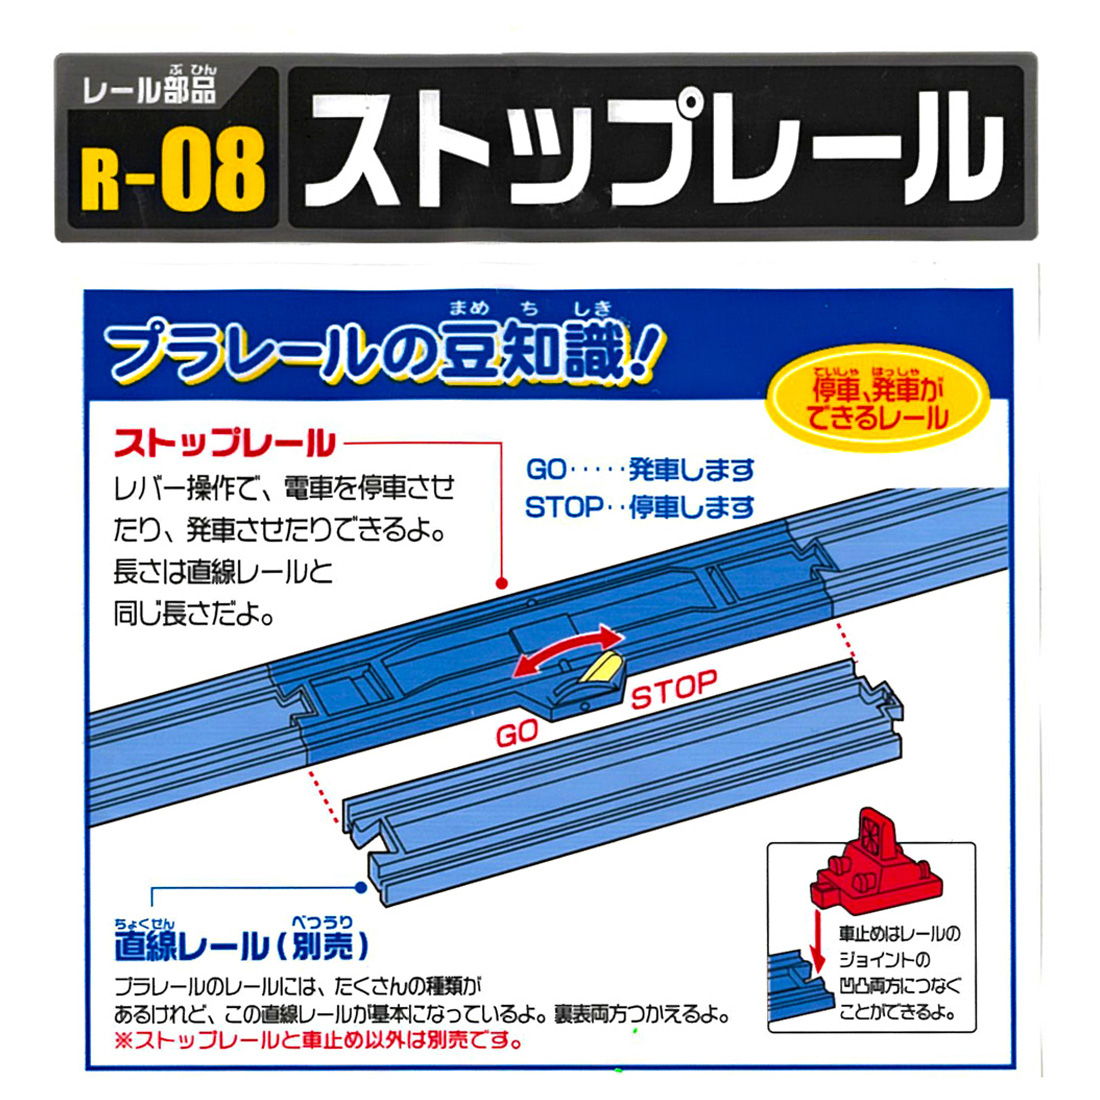  Takara Tommy R-08 Stop rail (2 pcs insertion * car cease 2 piece attaching ) returned goods kind another B